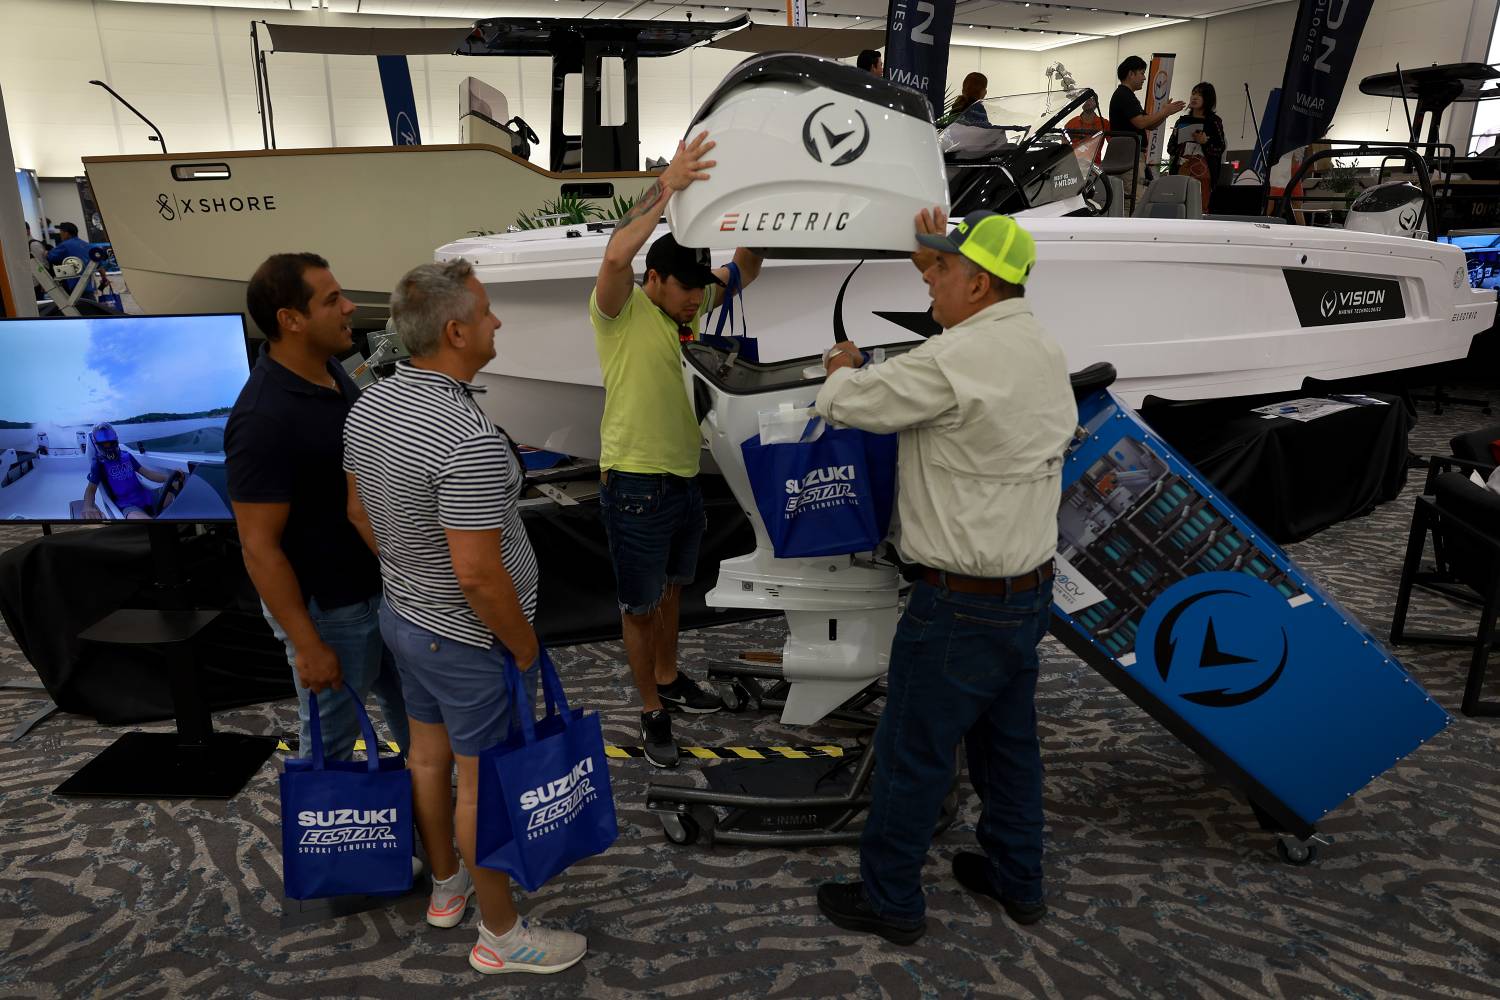 People checking out an electric boat at a convention.